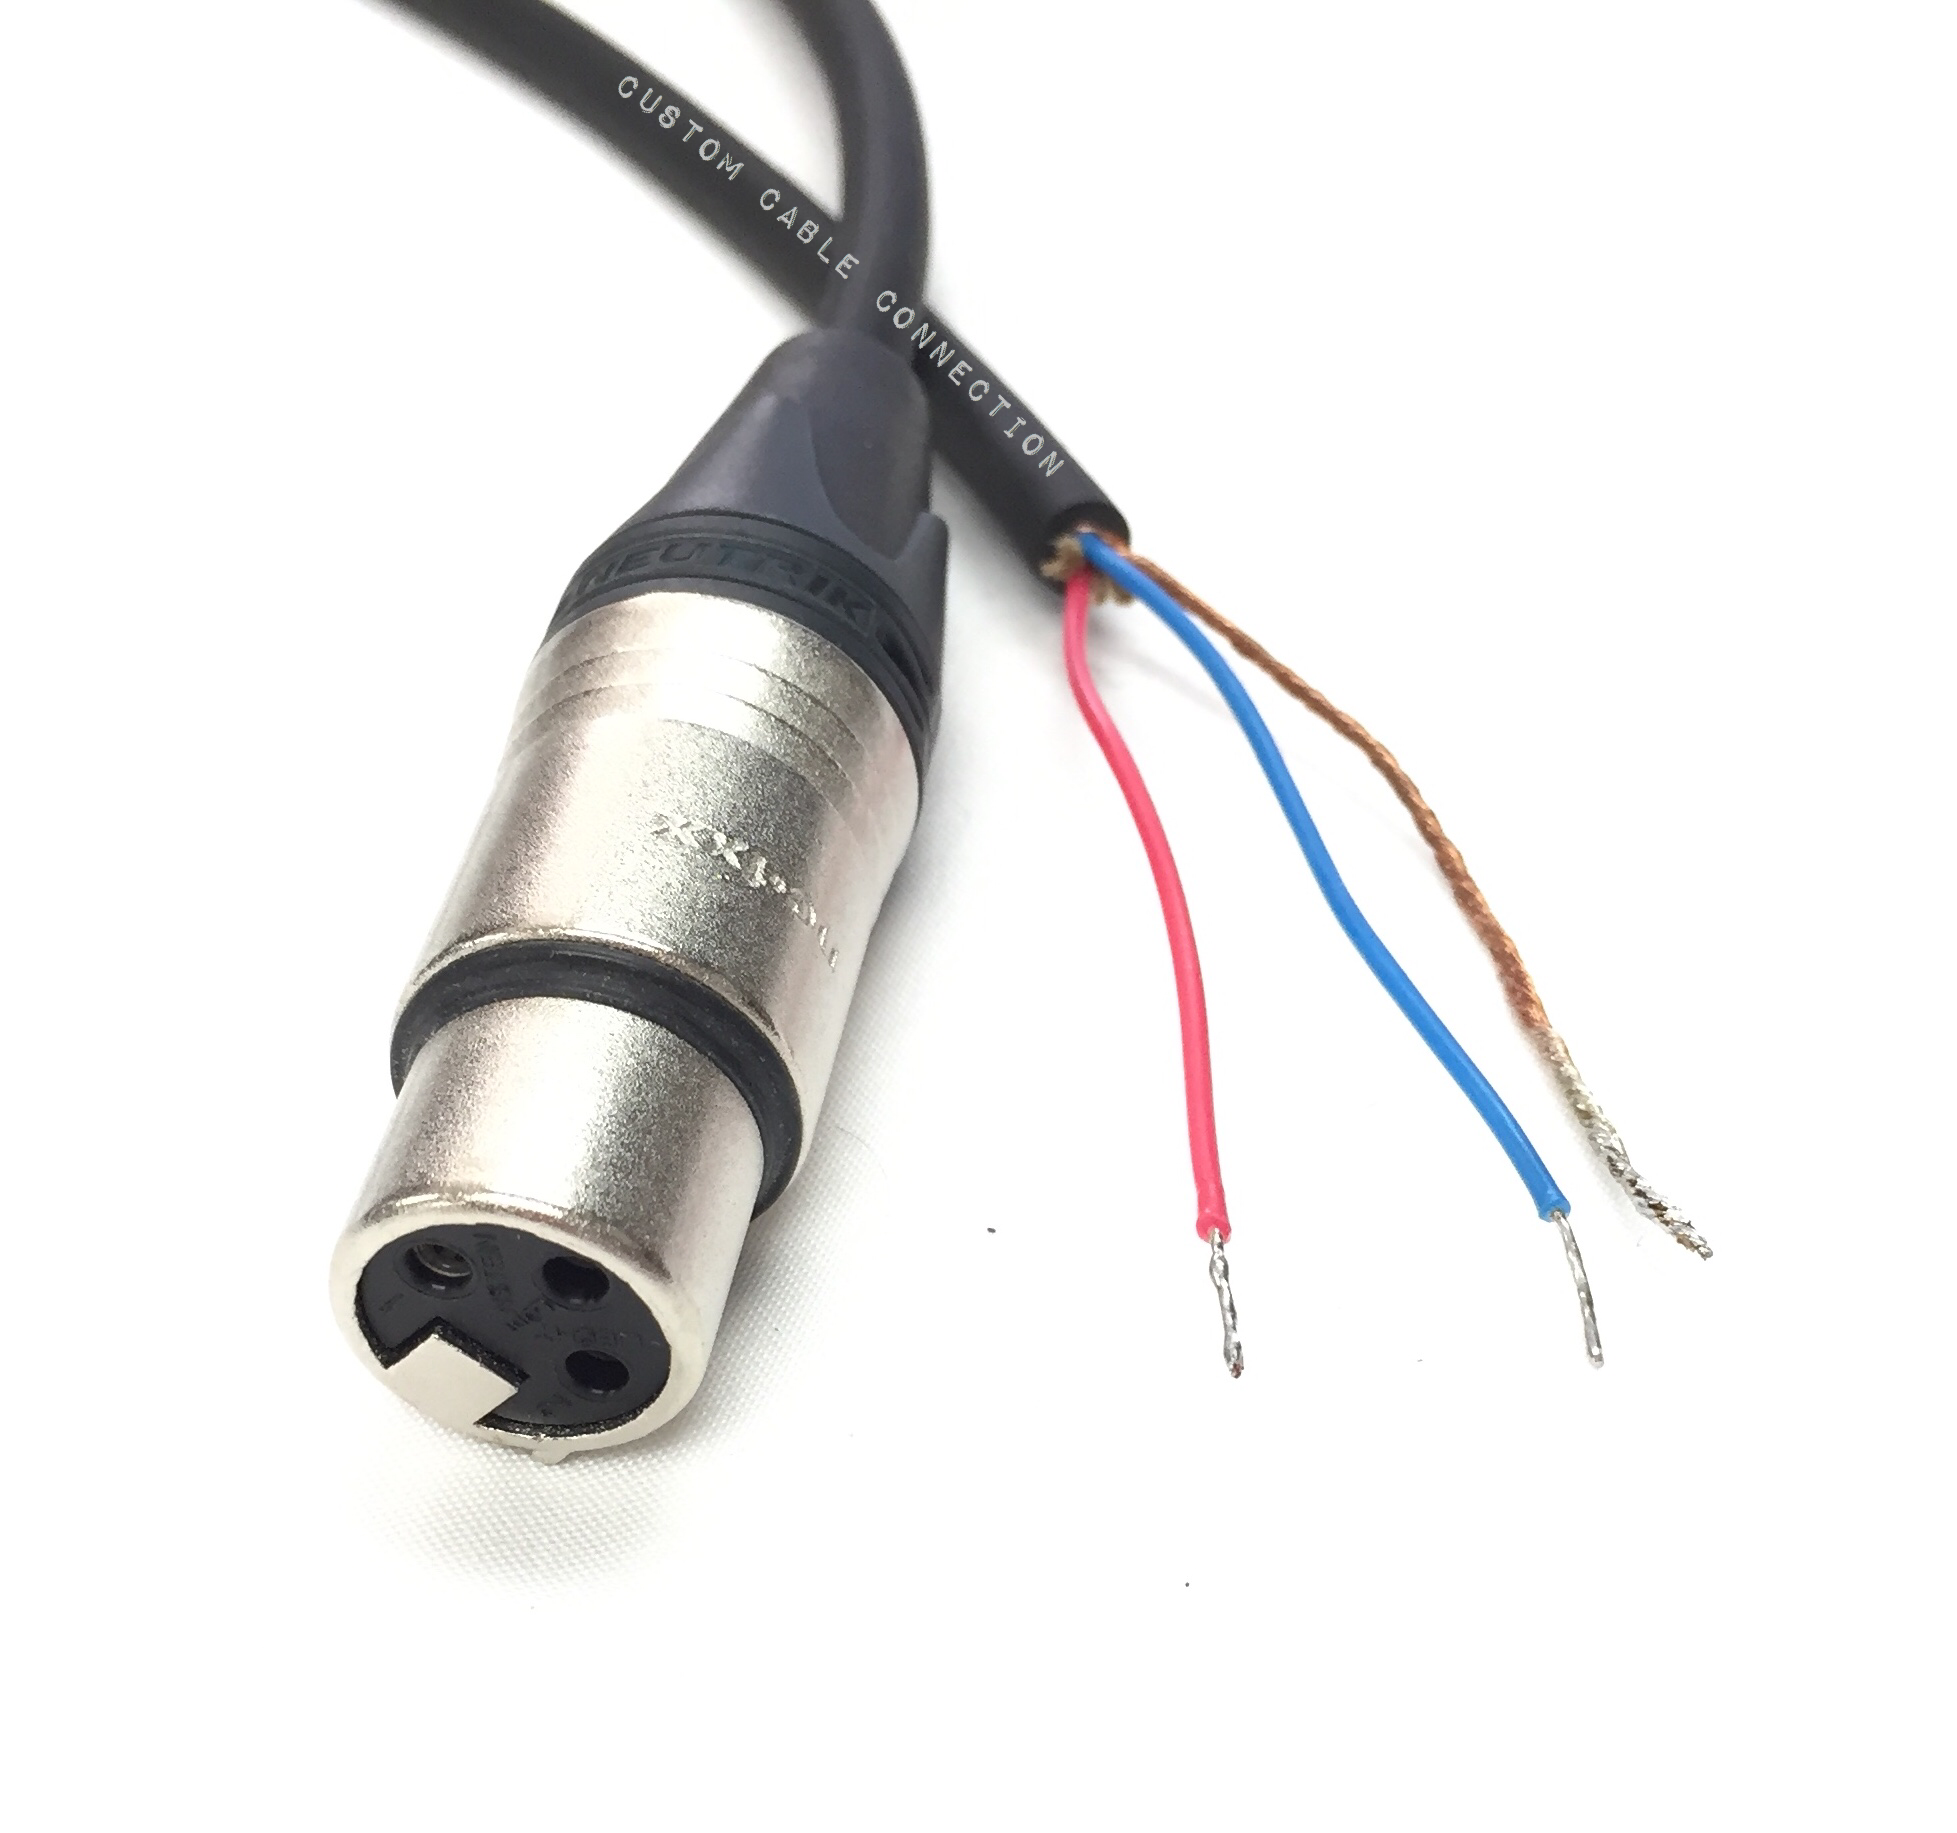 XLR 3 Pin to Blunt Installation Cable with Neutrik XLR Connectors (Mal -  Custom Cable Connection